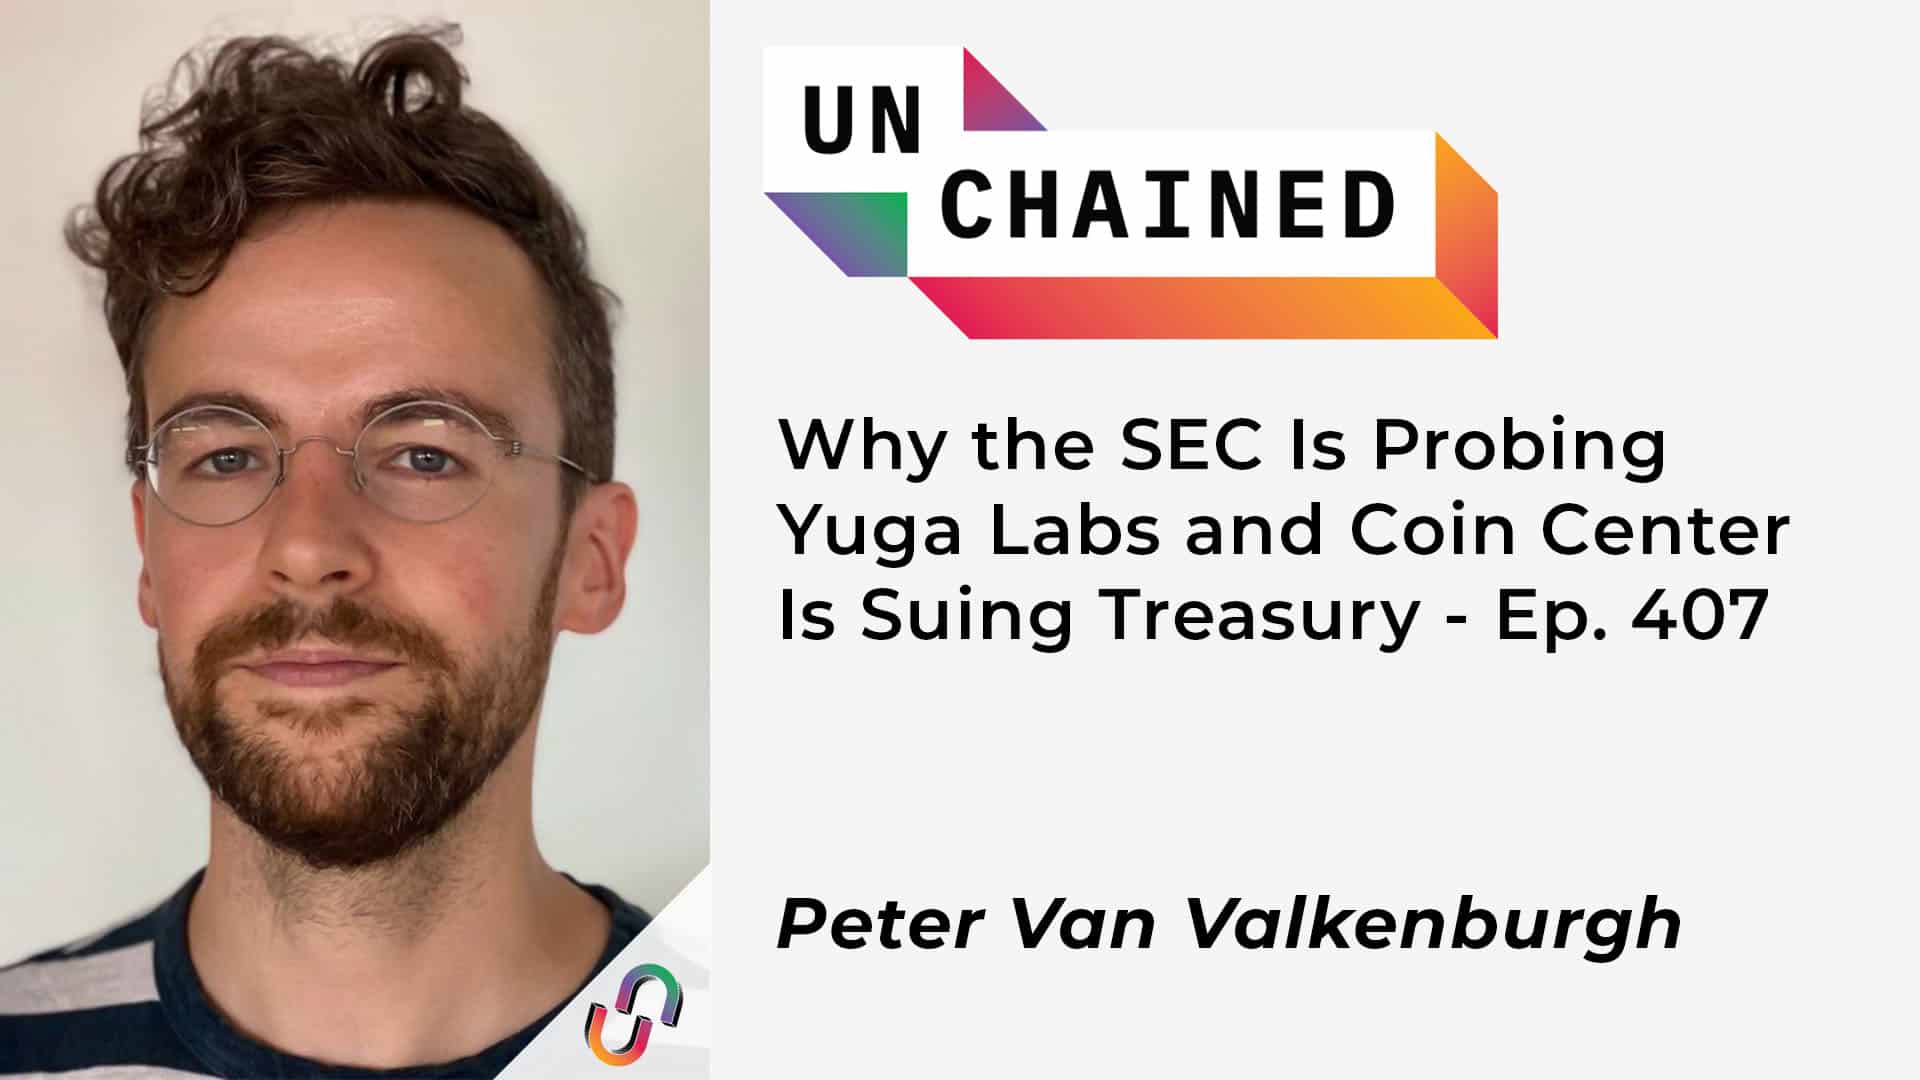 Why the SEC Is Probing Yuga Labs and Coin Center Is Suing Treasury - Ep. 407